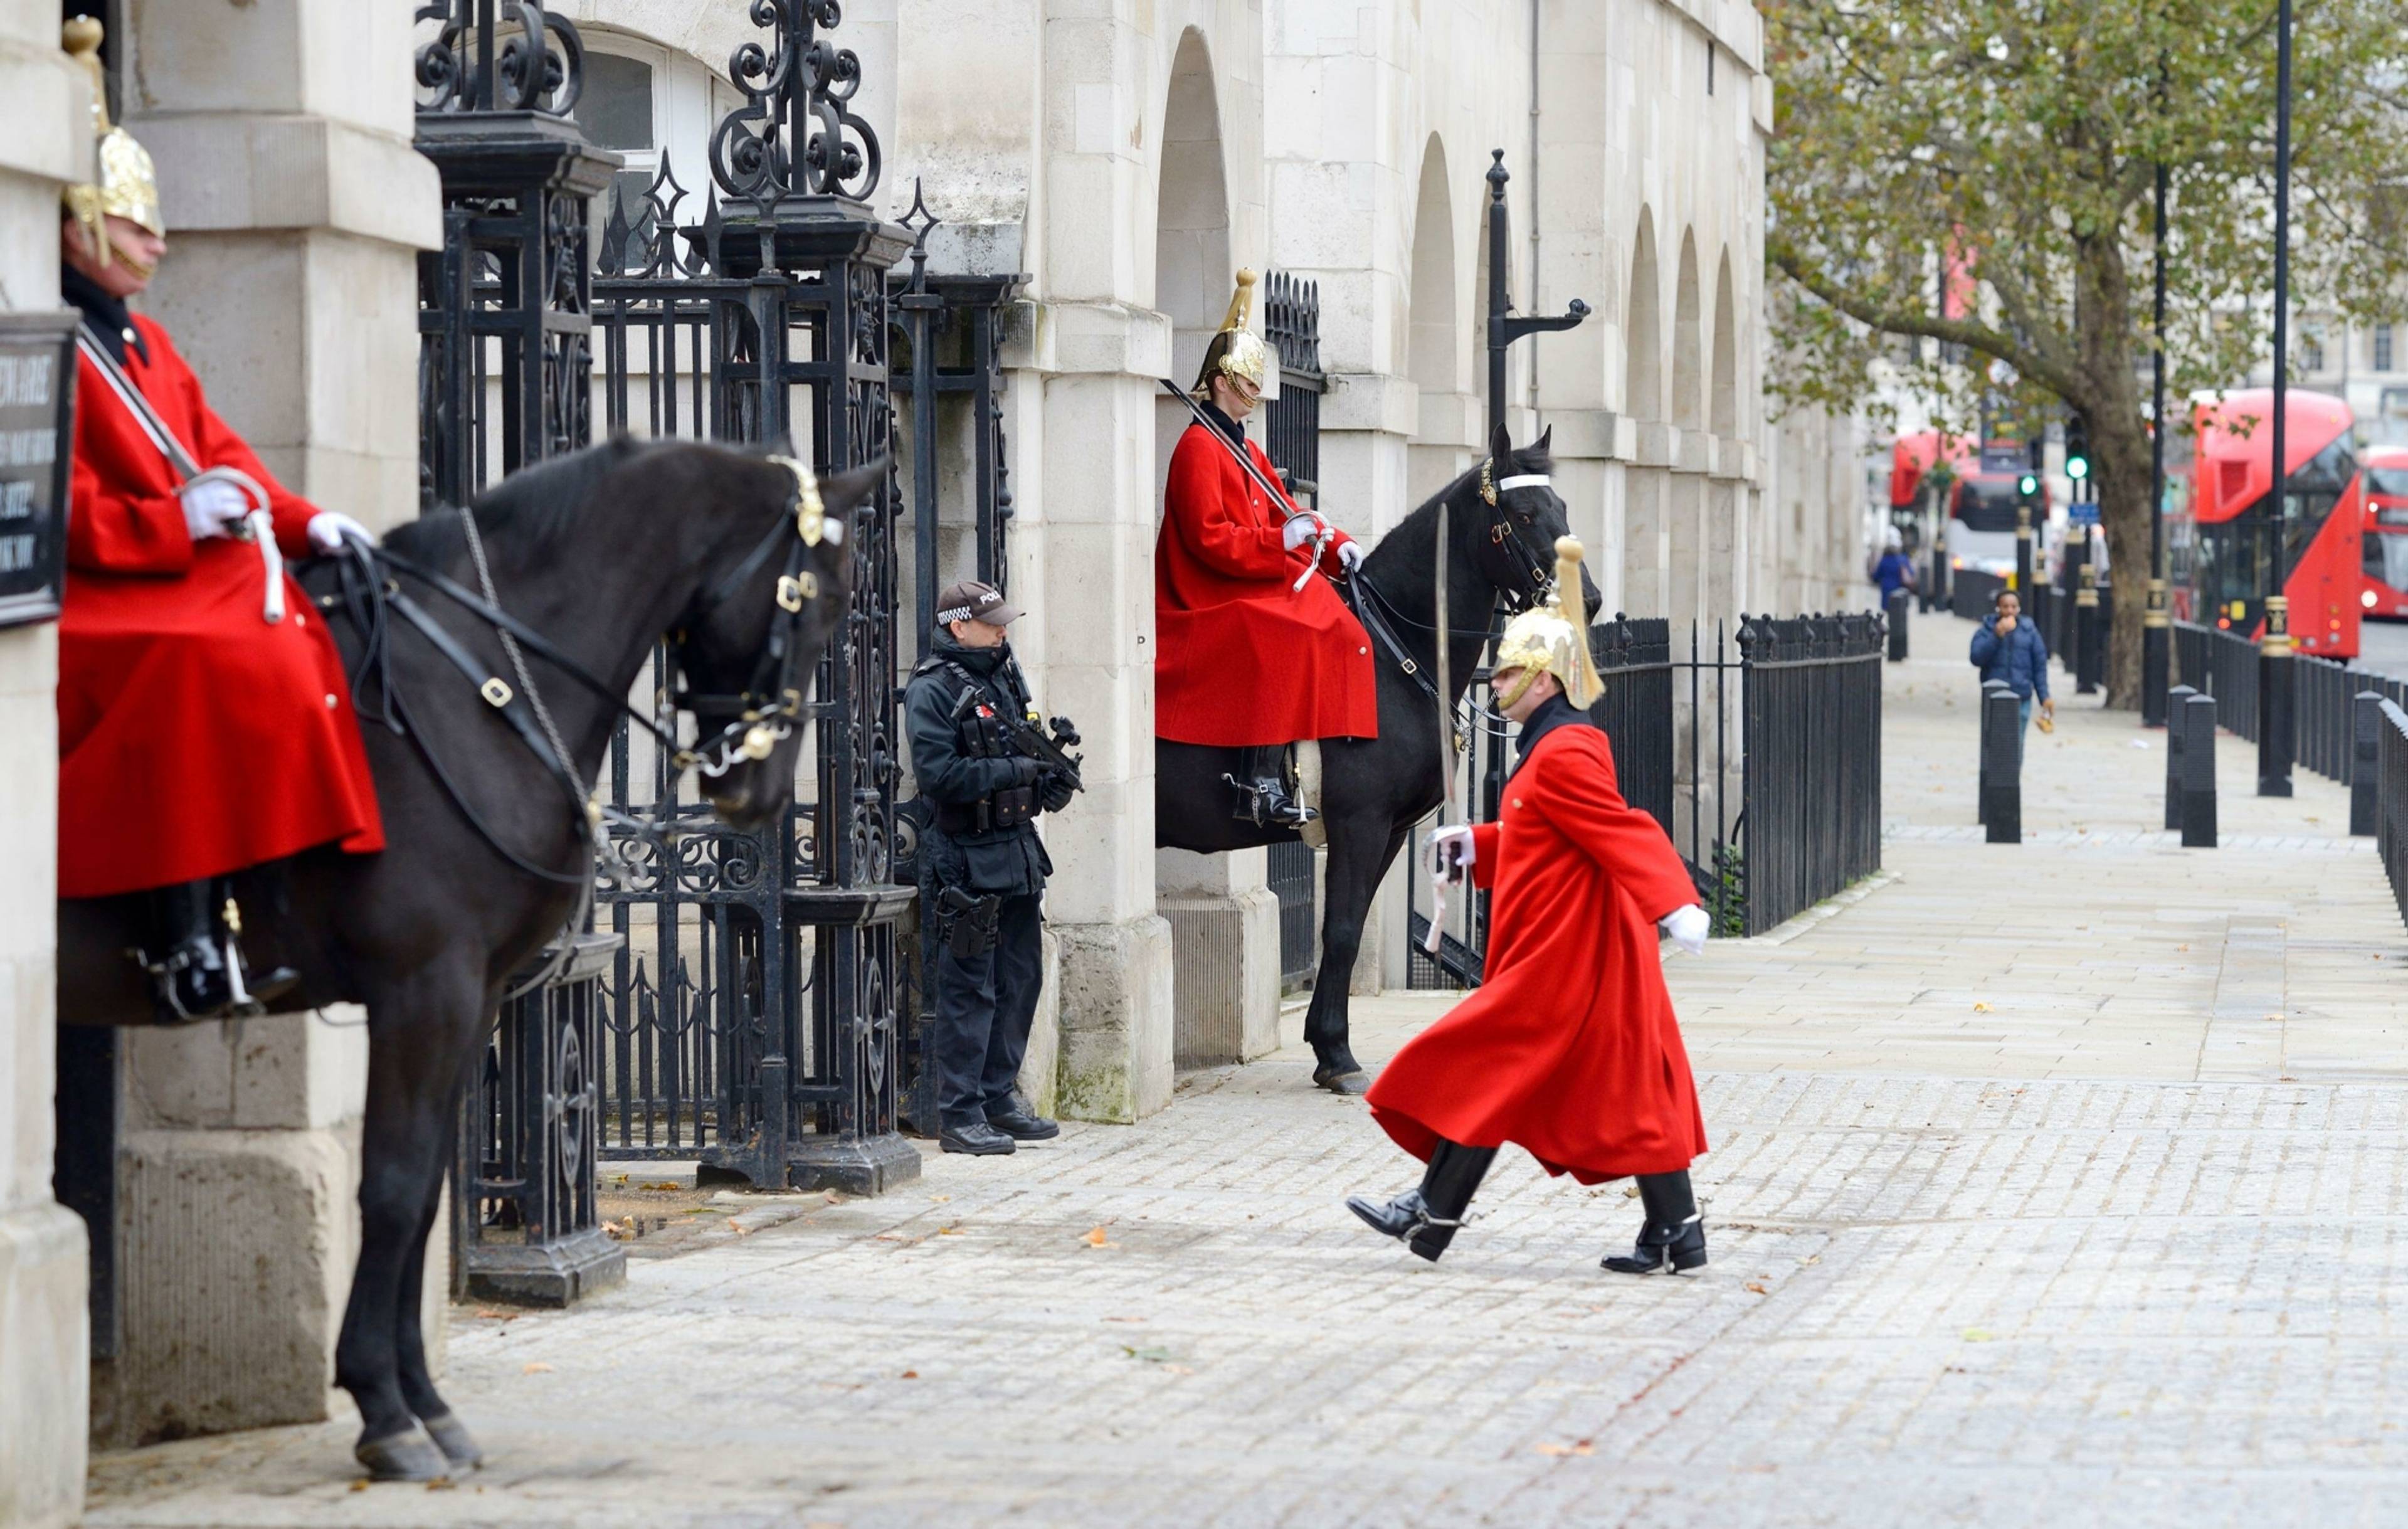 The Household Cavalry Museum